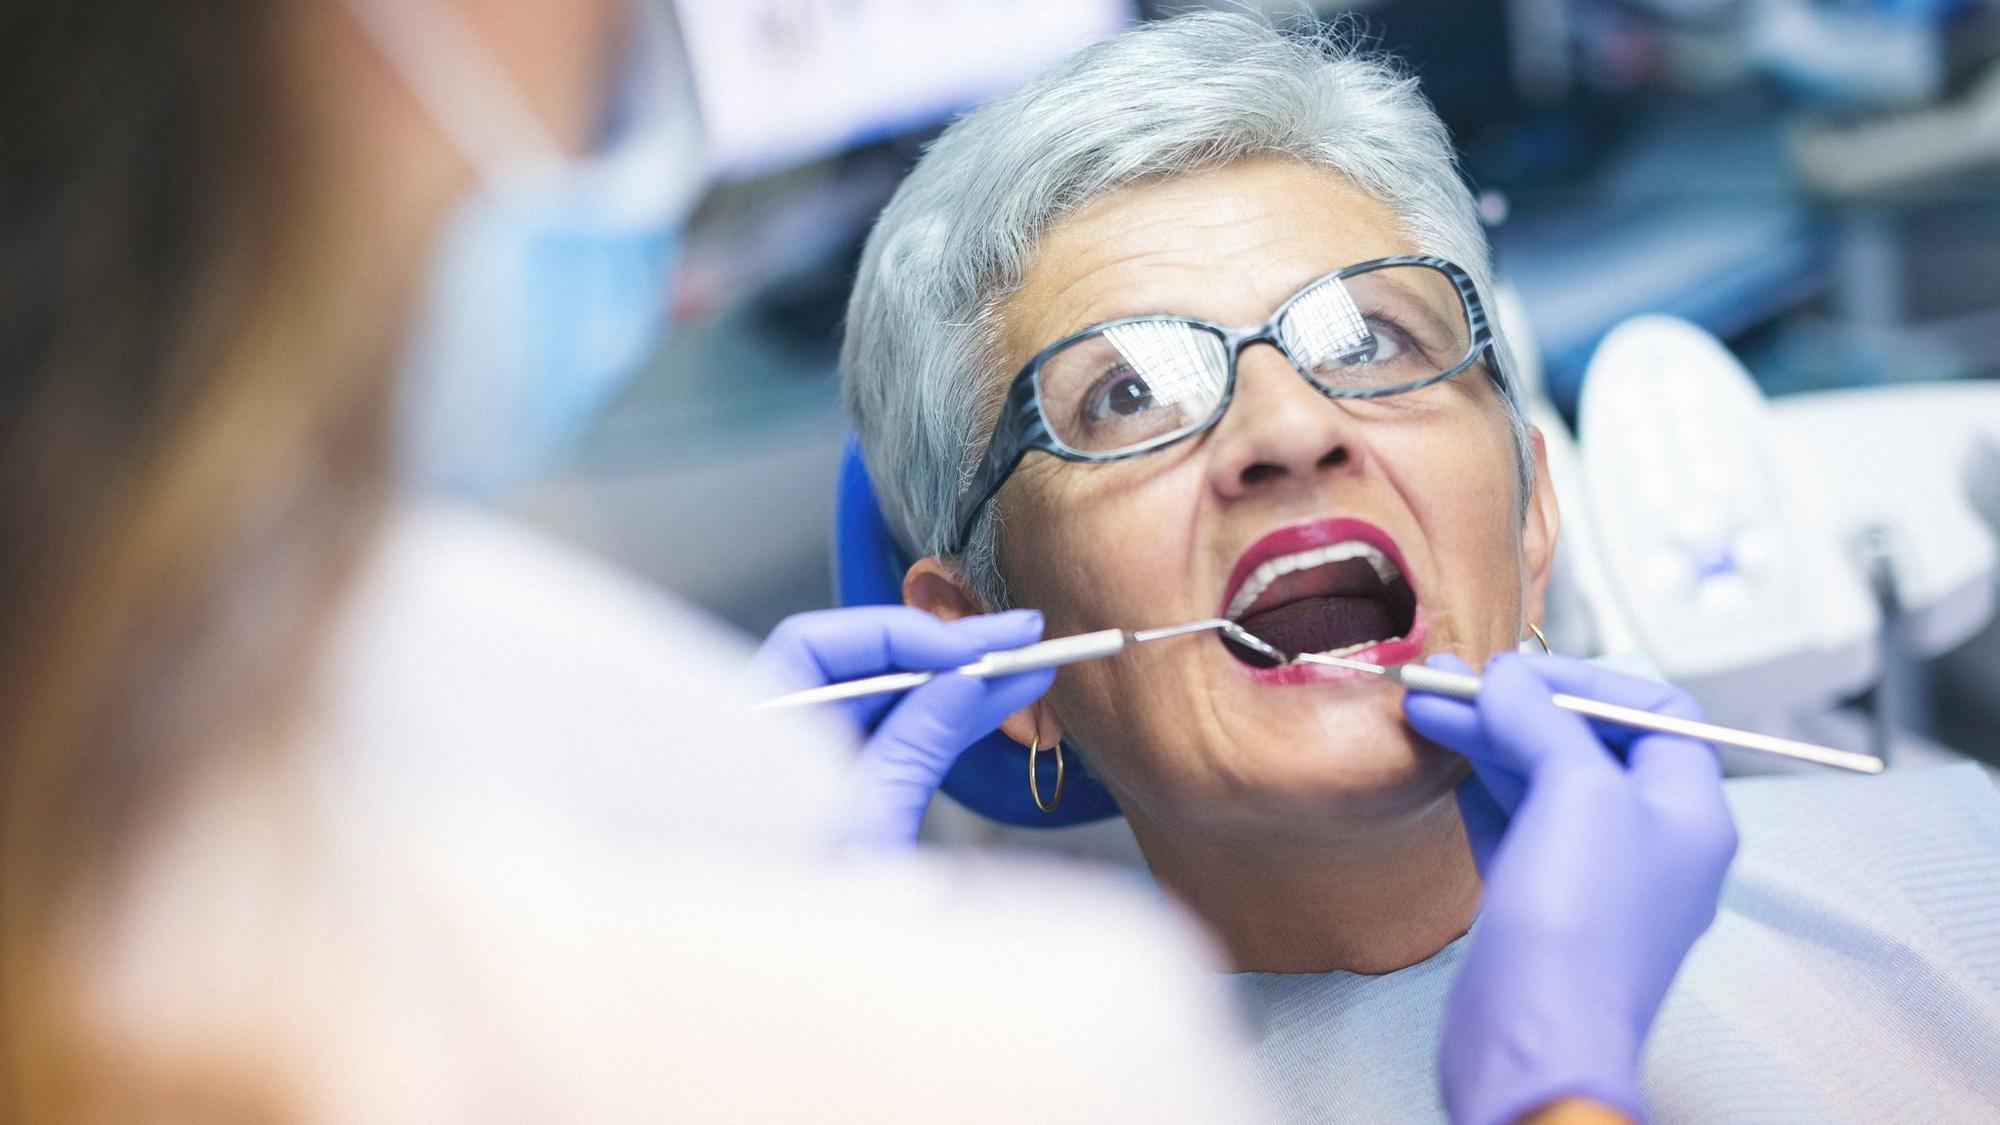 One change to dental care that could save lives, money